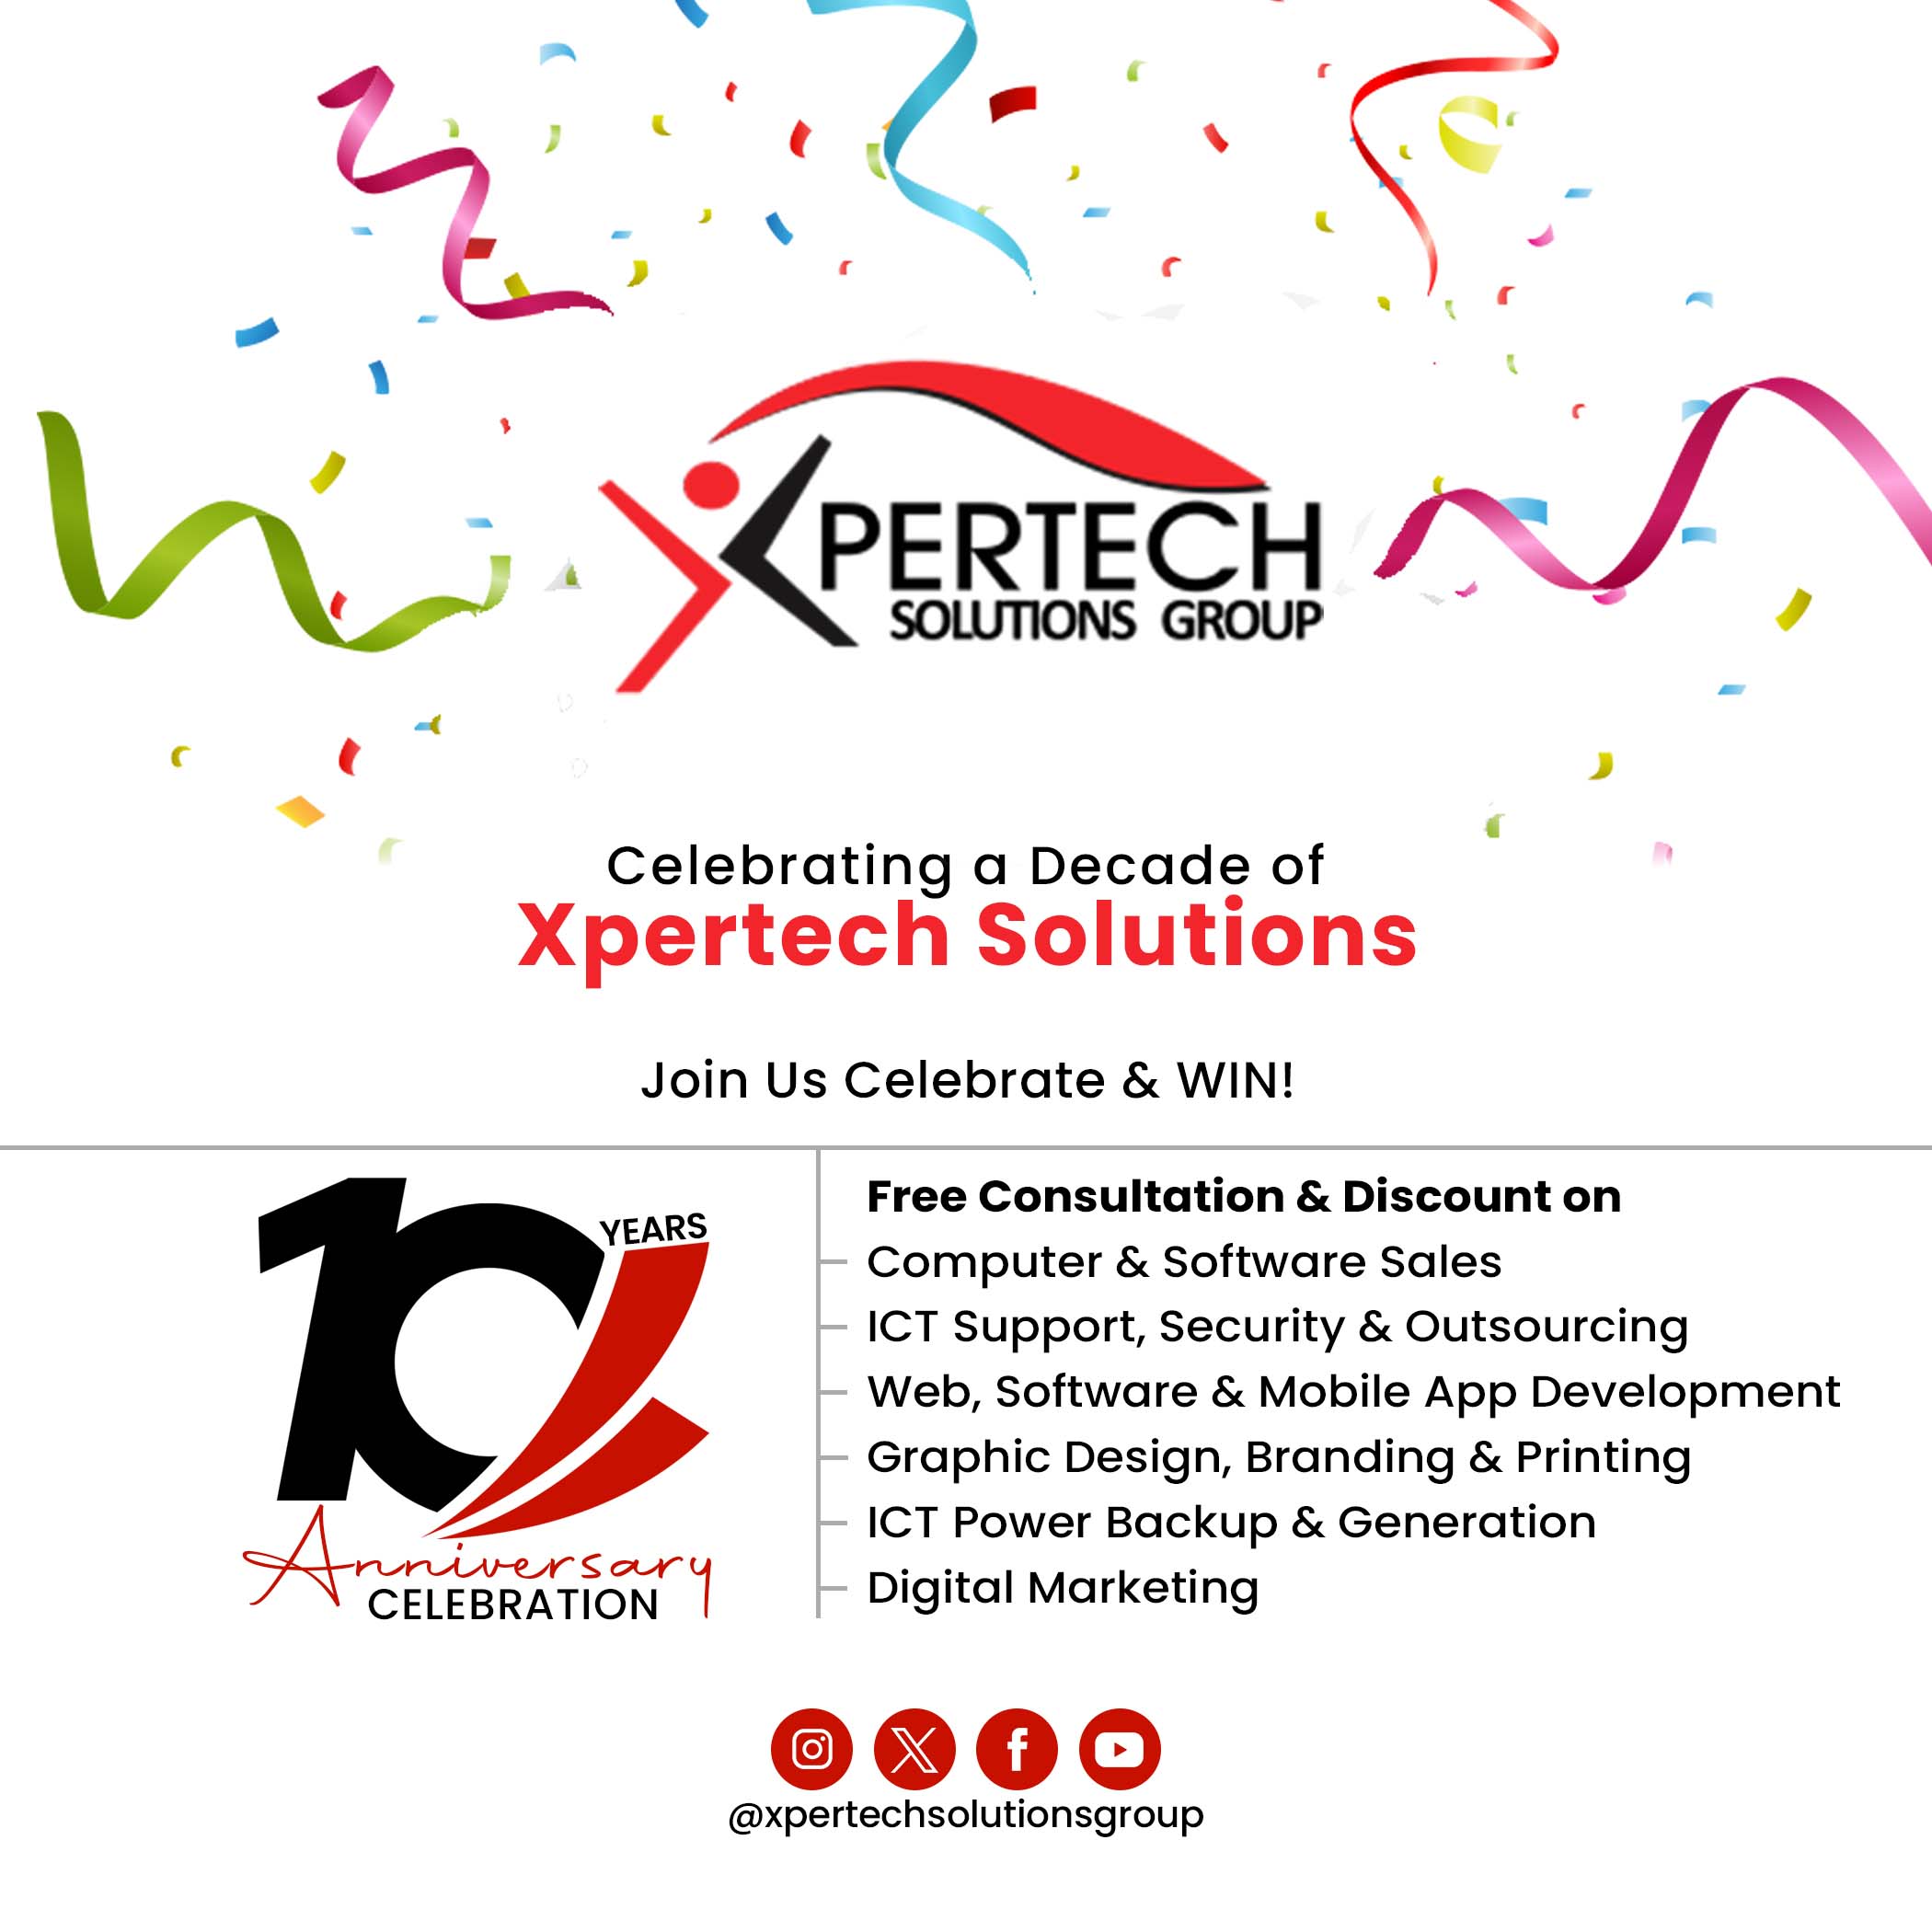 Xpertech Solutions 10th Anniversary Celebration - A group of people cheering and celebrating